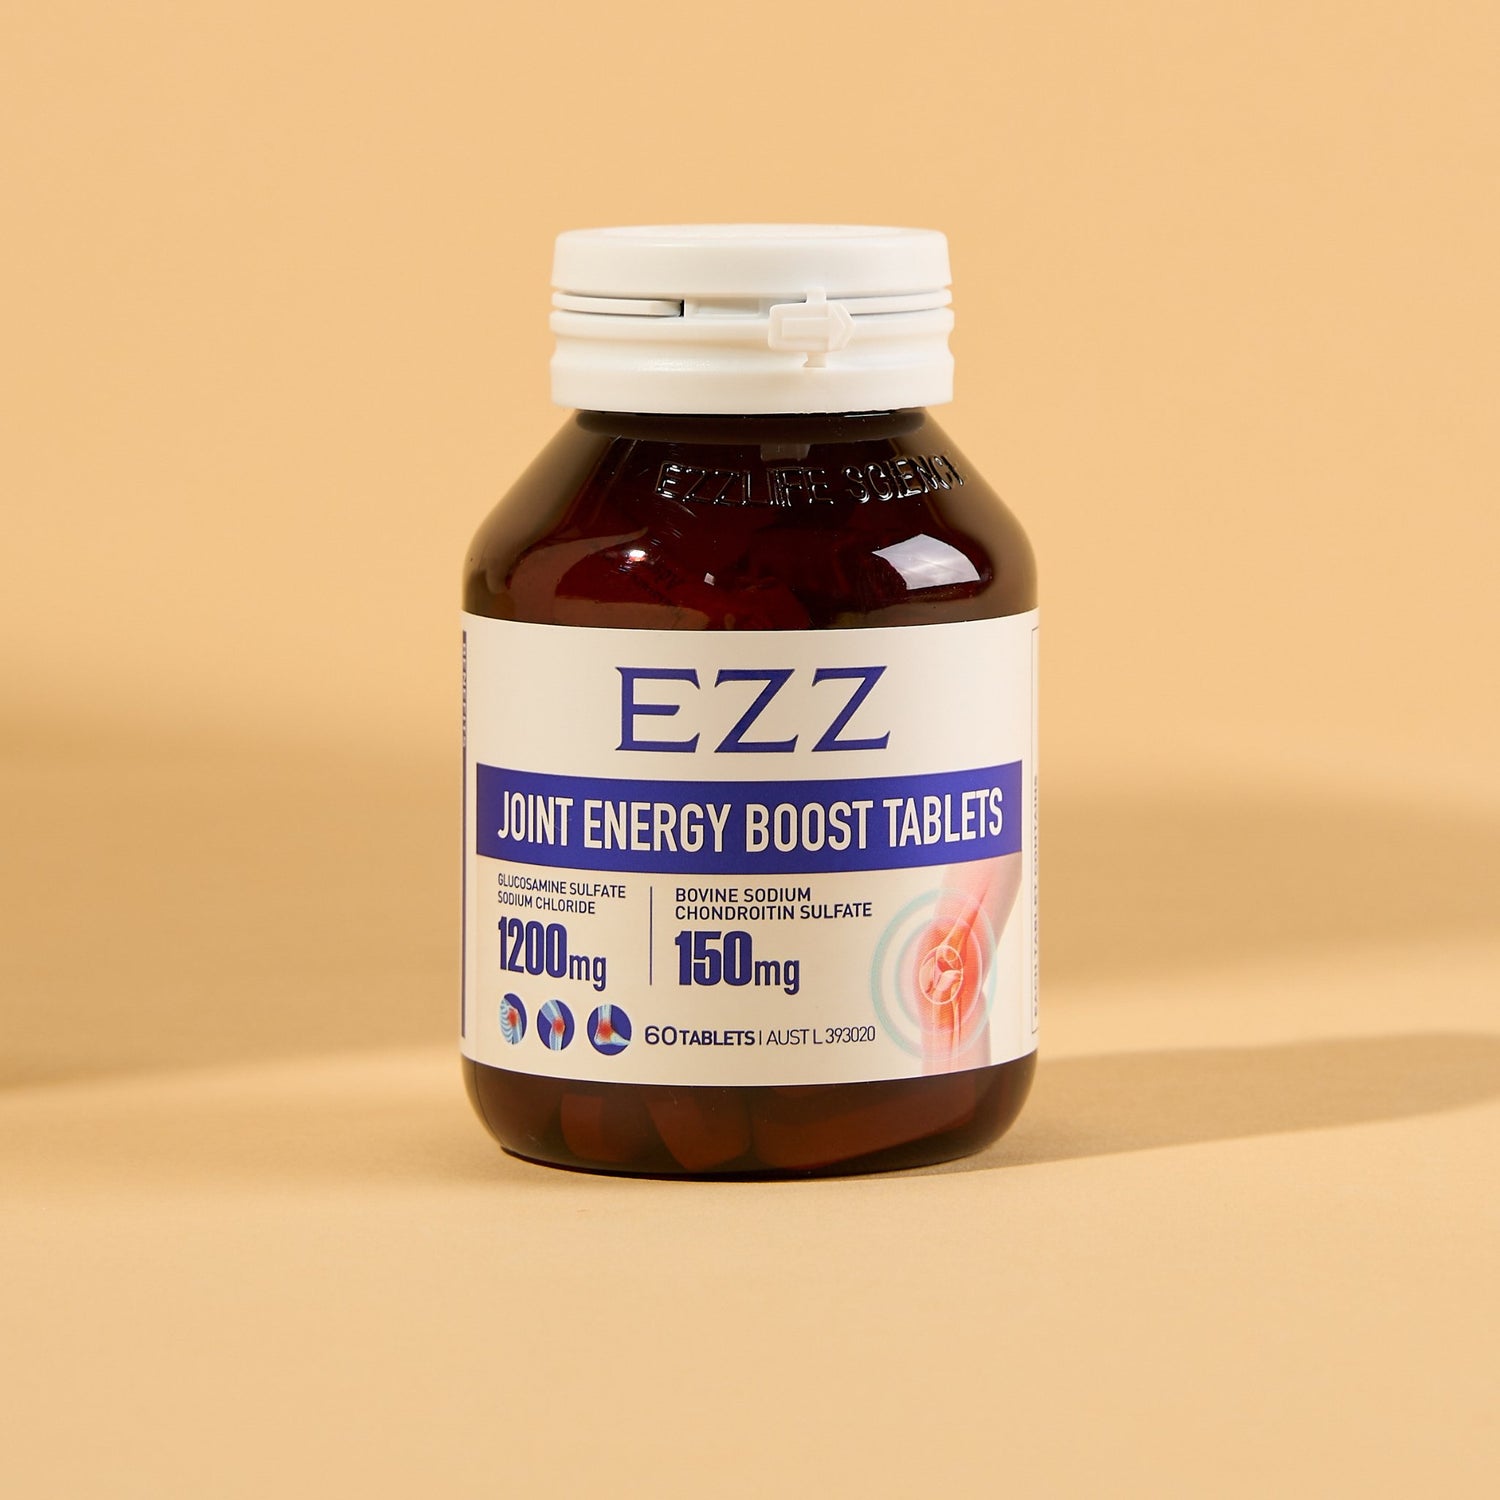 EZZ Joint Energy Boost Tablets - EZZ OFFICIAL